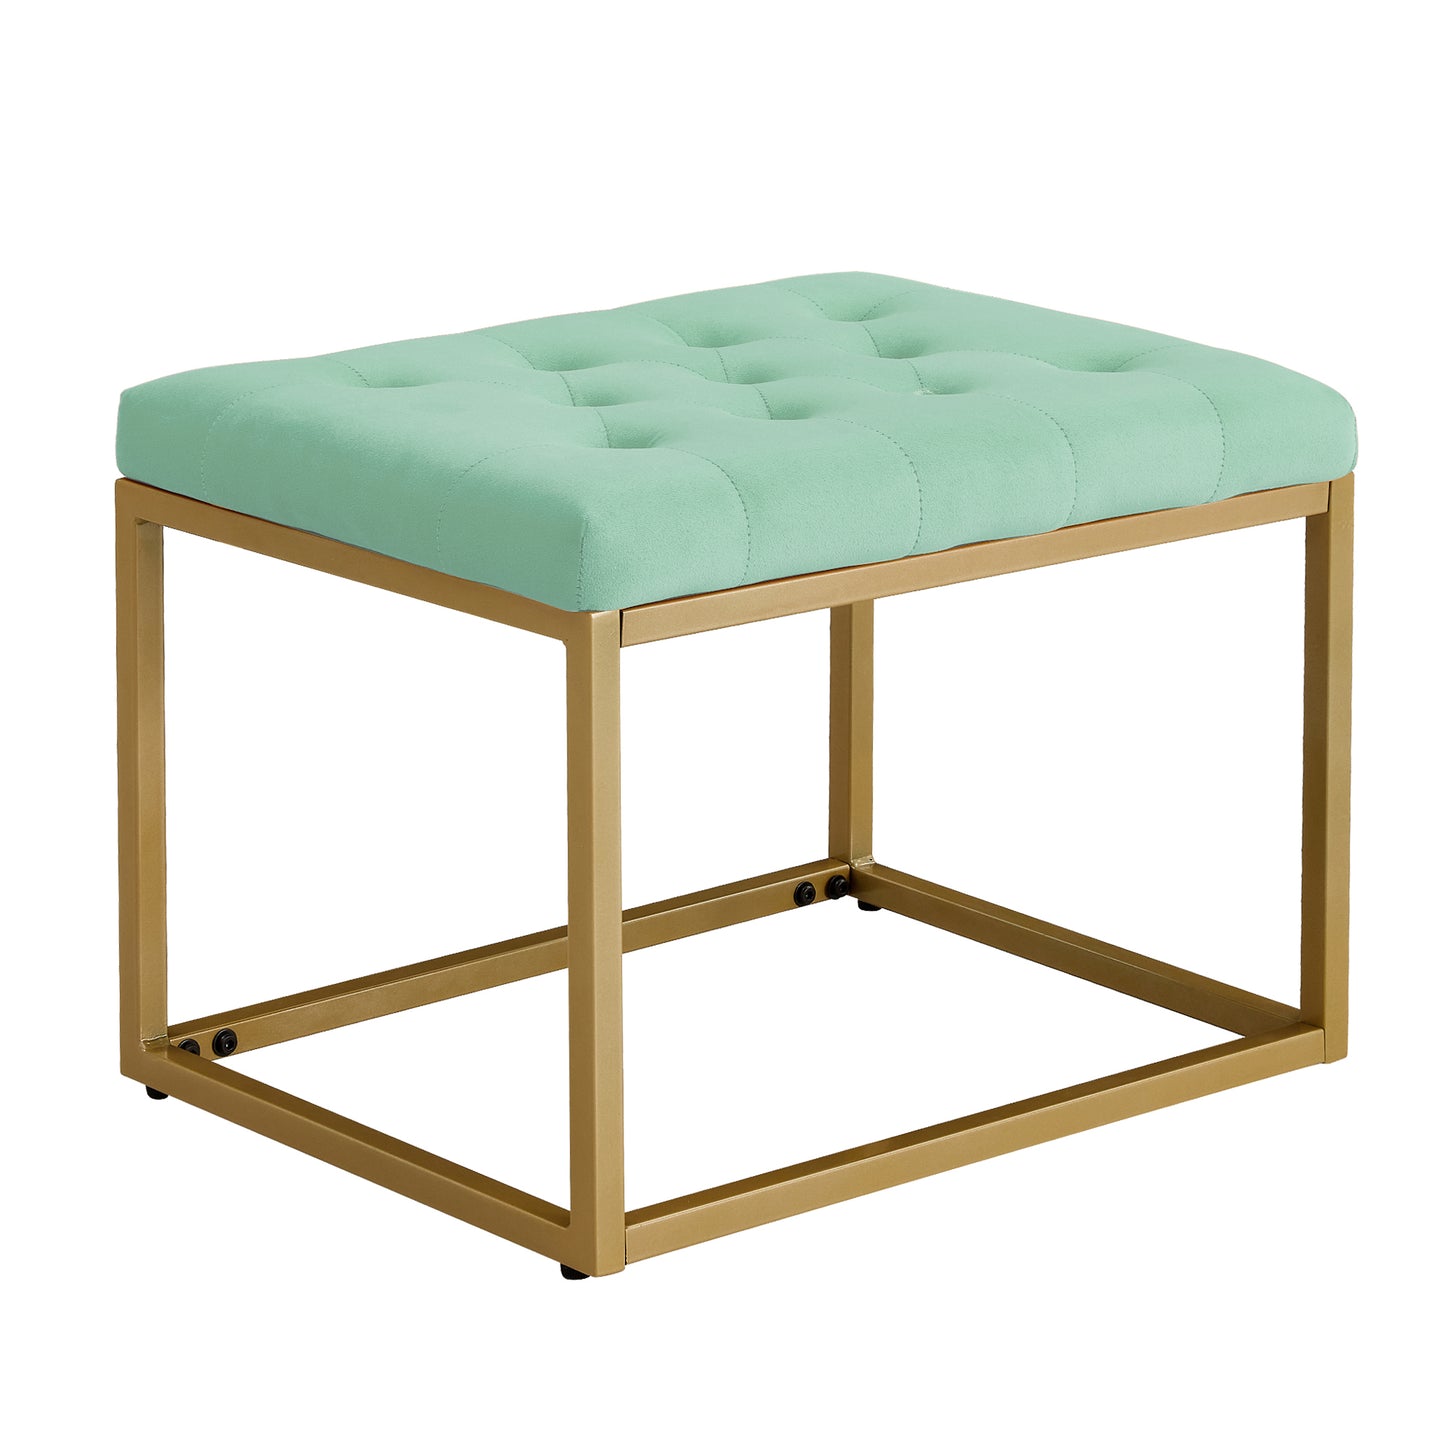 Velvet Shoe Changing Stool,Light green Footstool, Square Vanity Chair, Sofa Stool,Makup Stool Rest Stool. Piano Bench.Suitable for Clothes Shop,Living Room, Porch, Fitting Room Bedroom ST-001-DGN